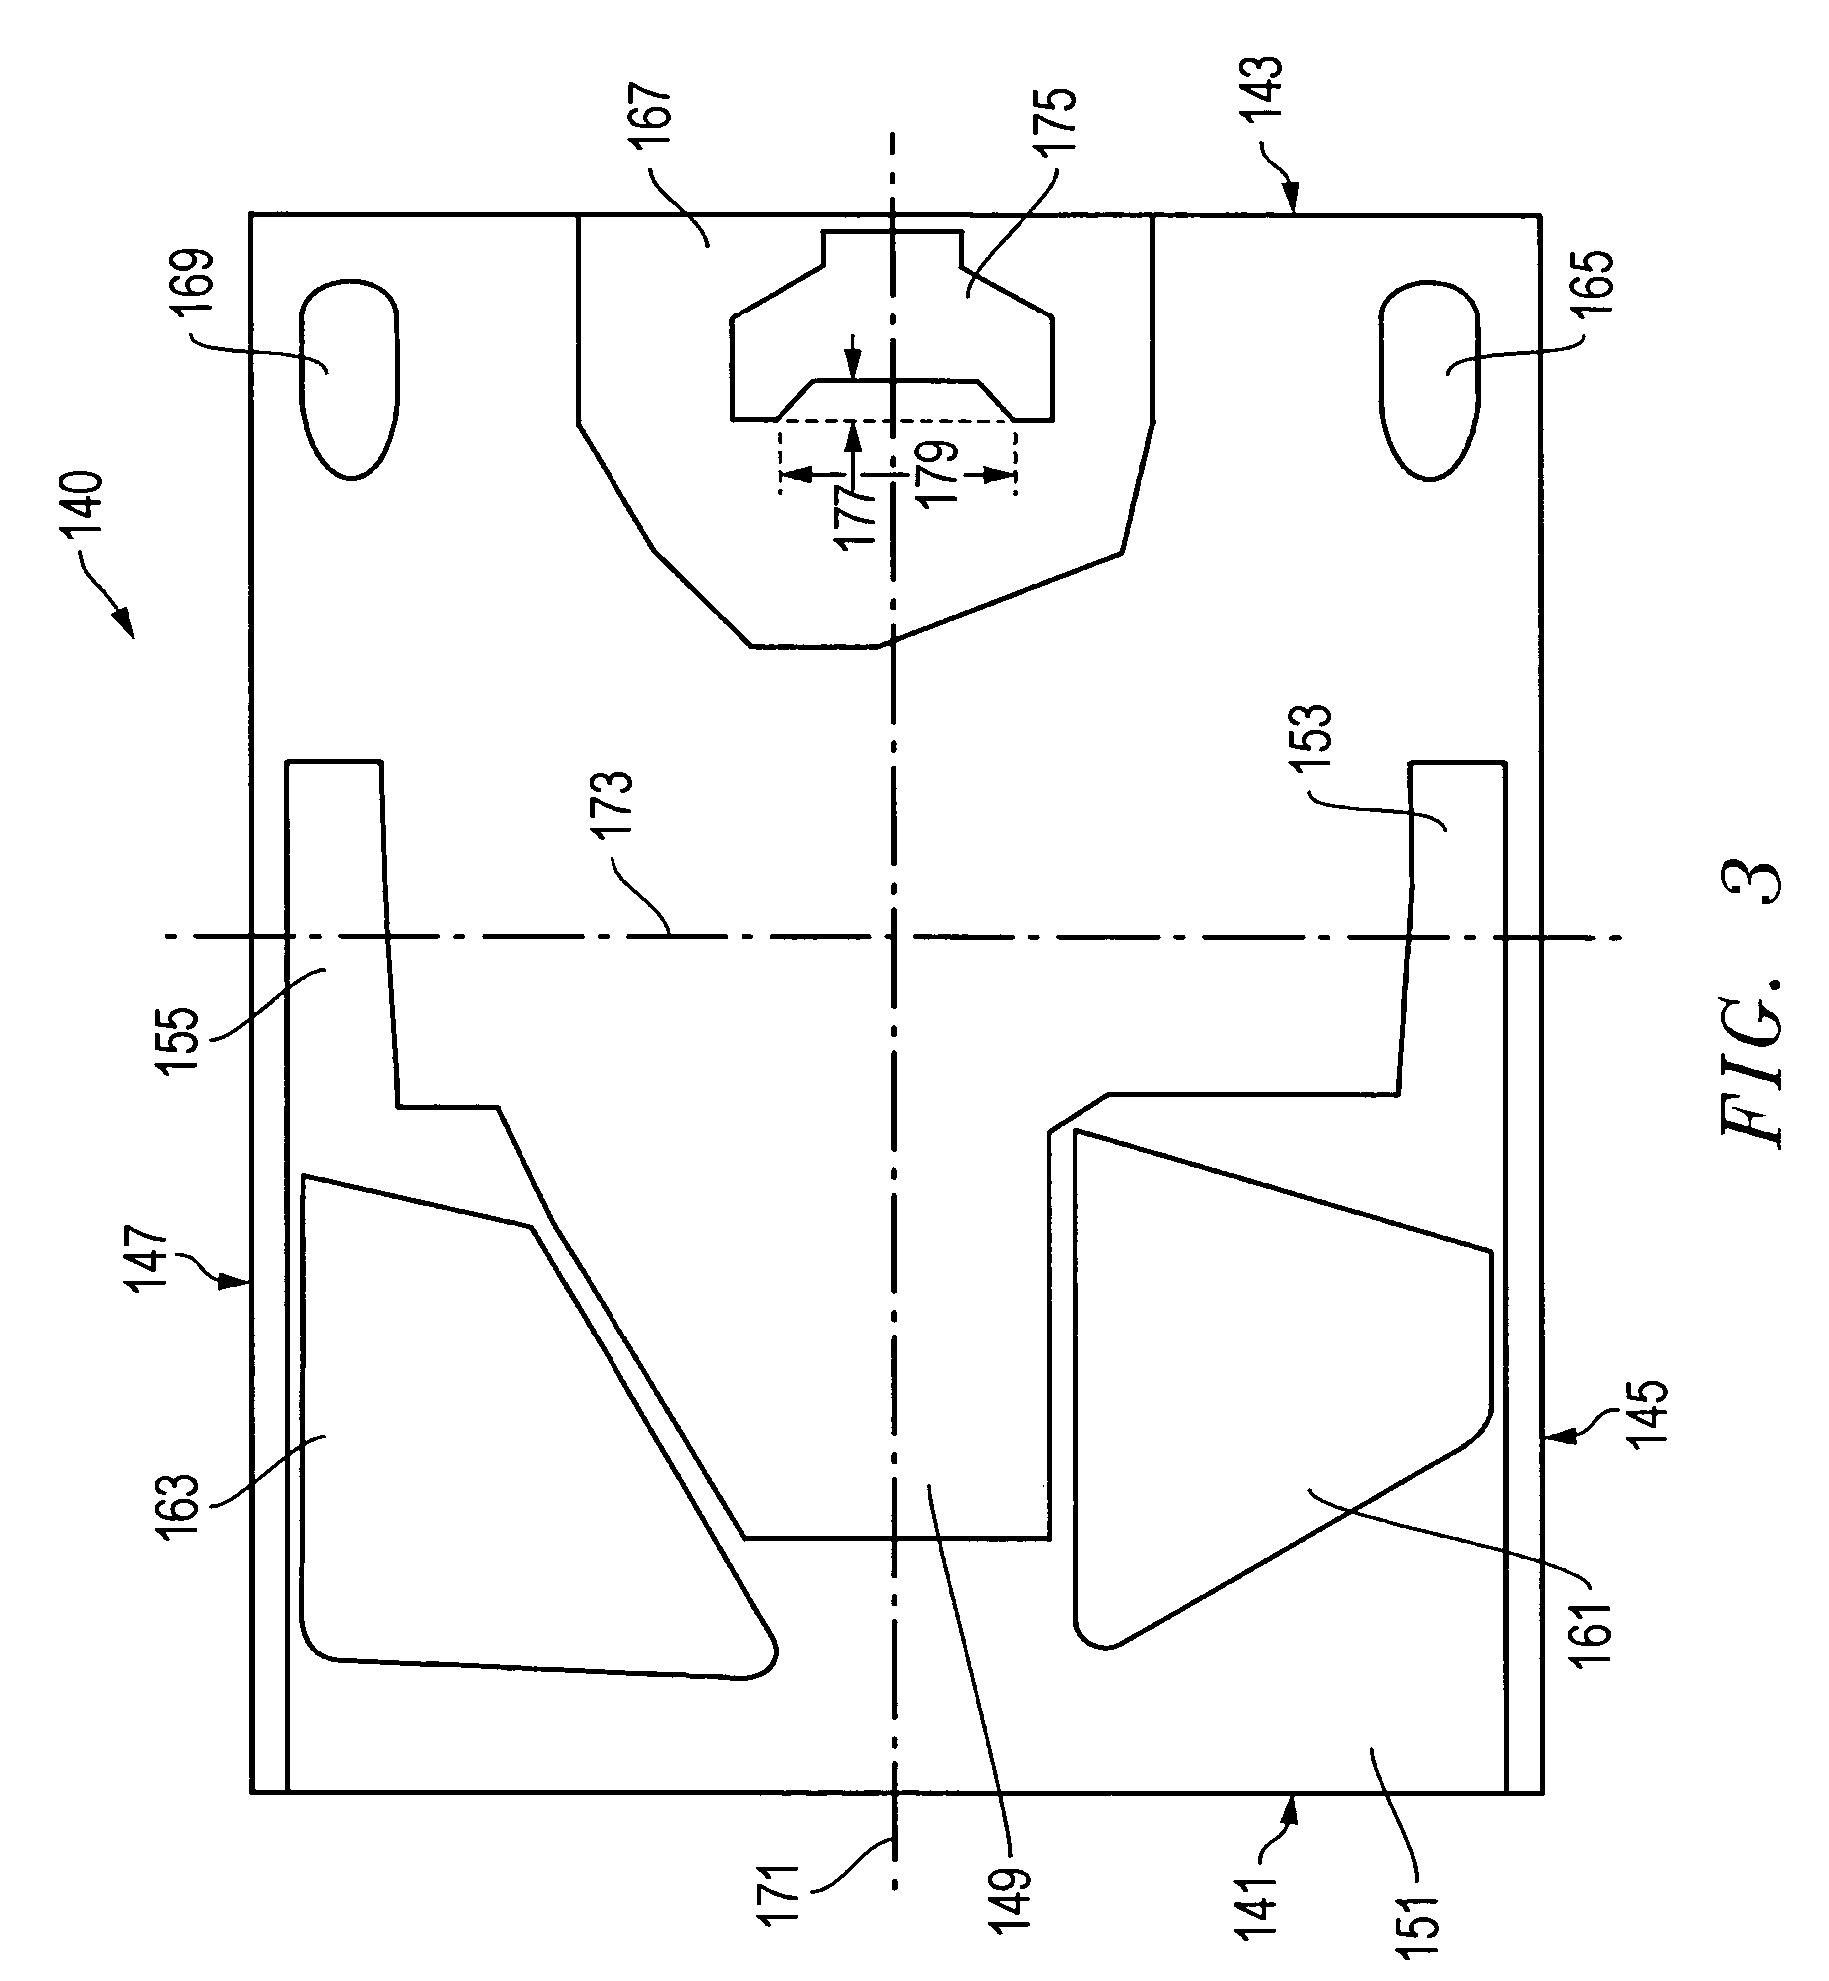 System, method, and apparatus for improving the multiple velocity performance and write element protrusion compensation of disk drive sliders